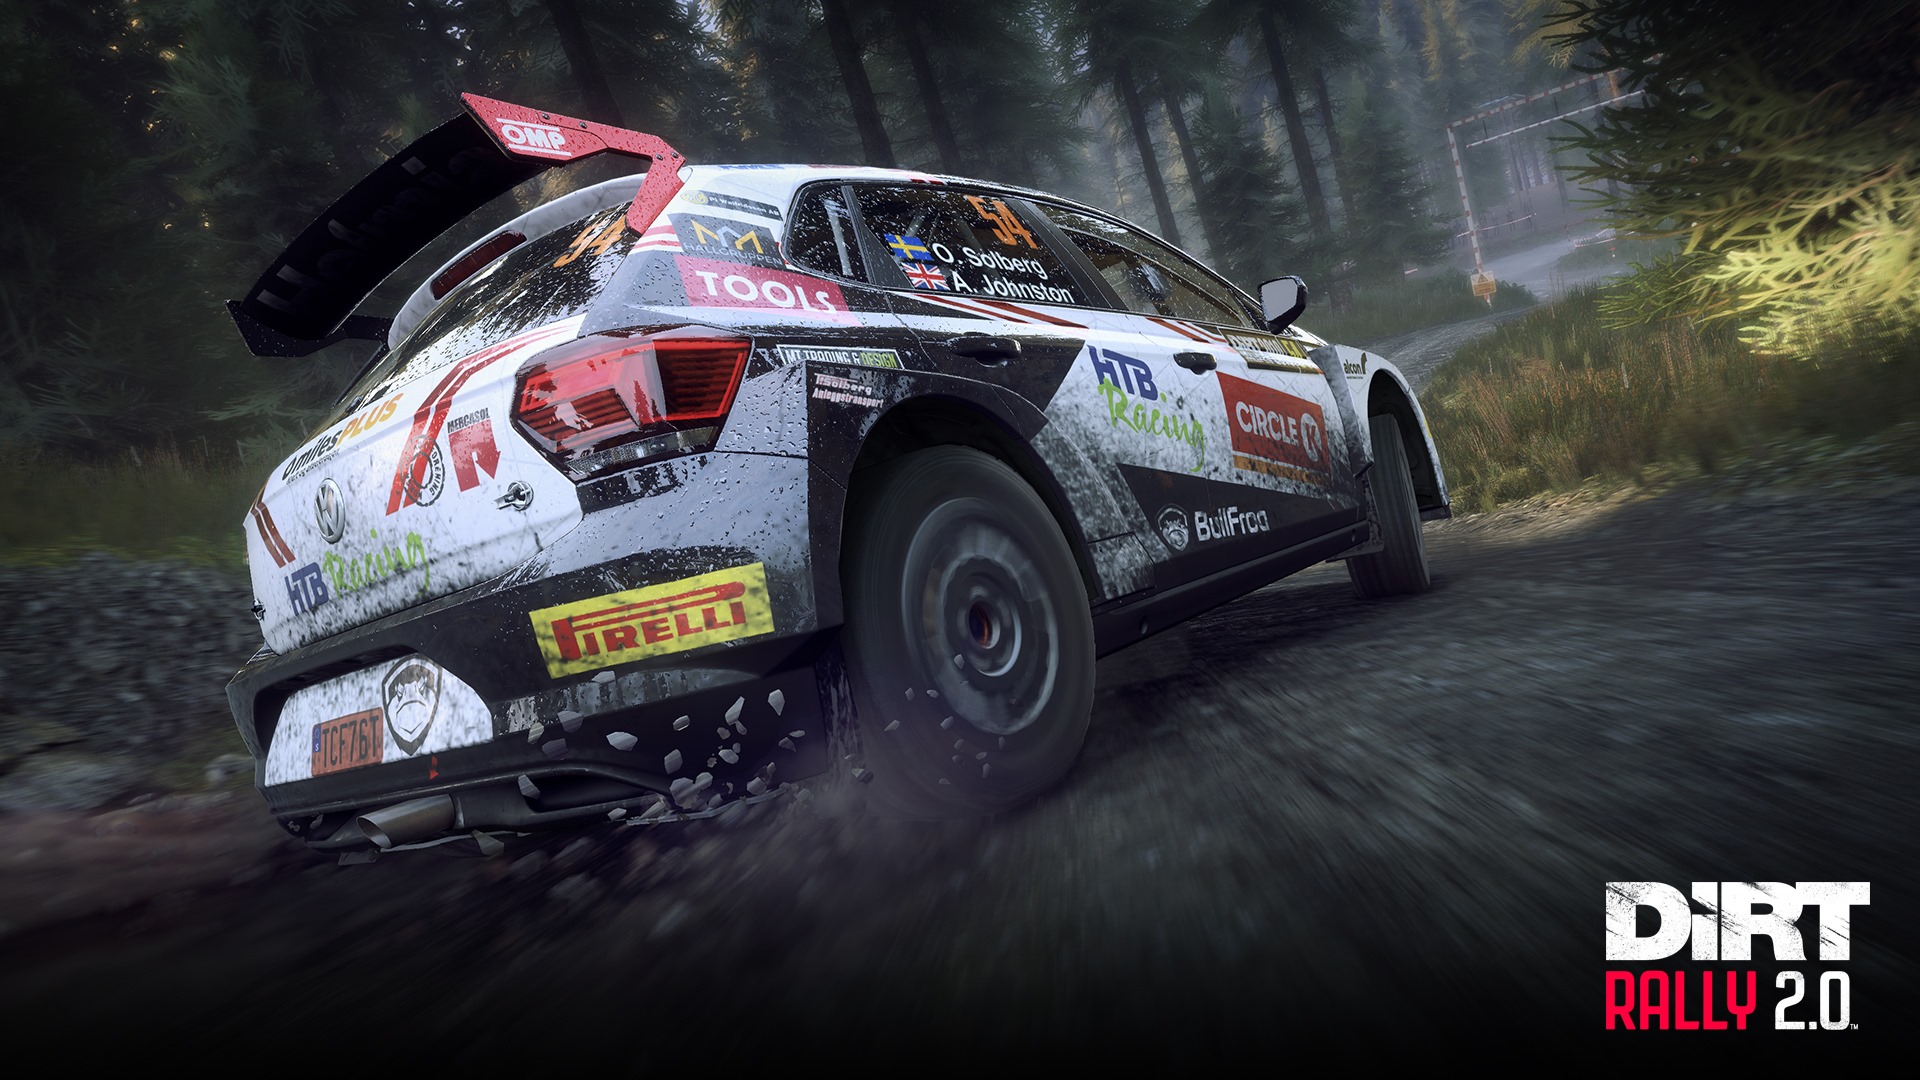 dirt rally 2.0 xbox one